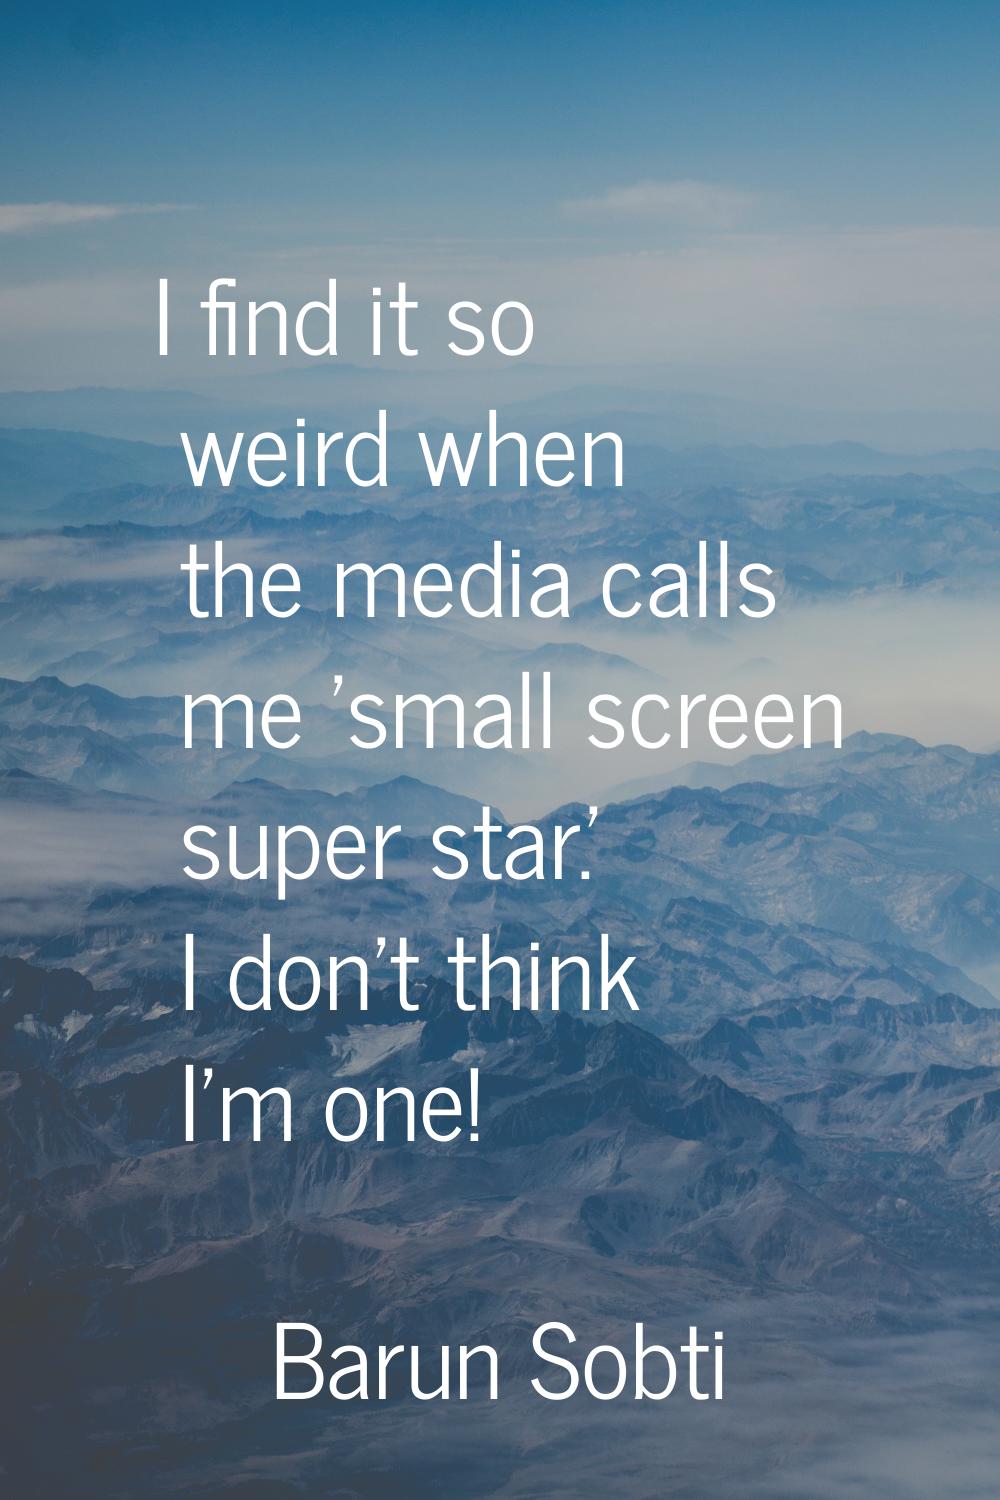 I find it so weird when the media calls me 'small screen super star.' I don't think I'm one!